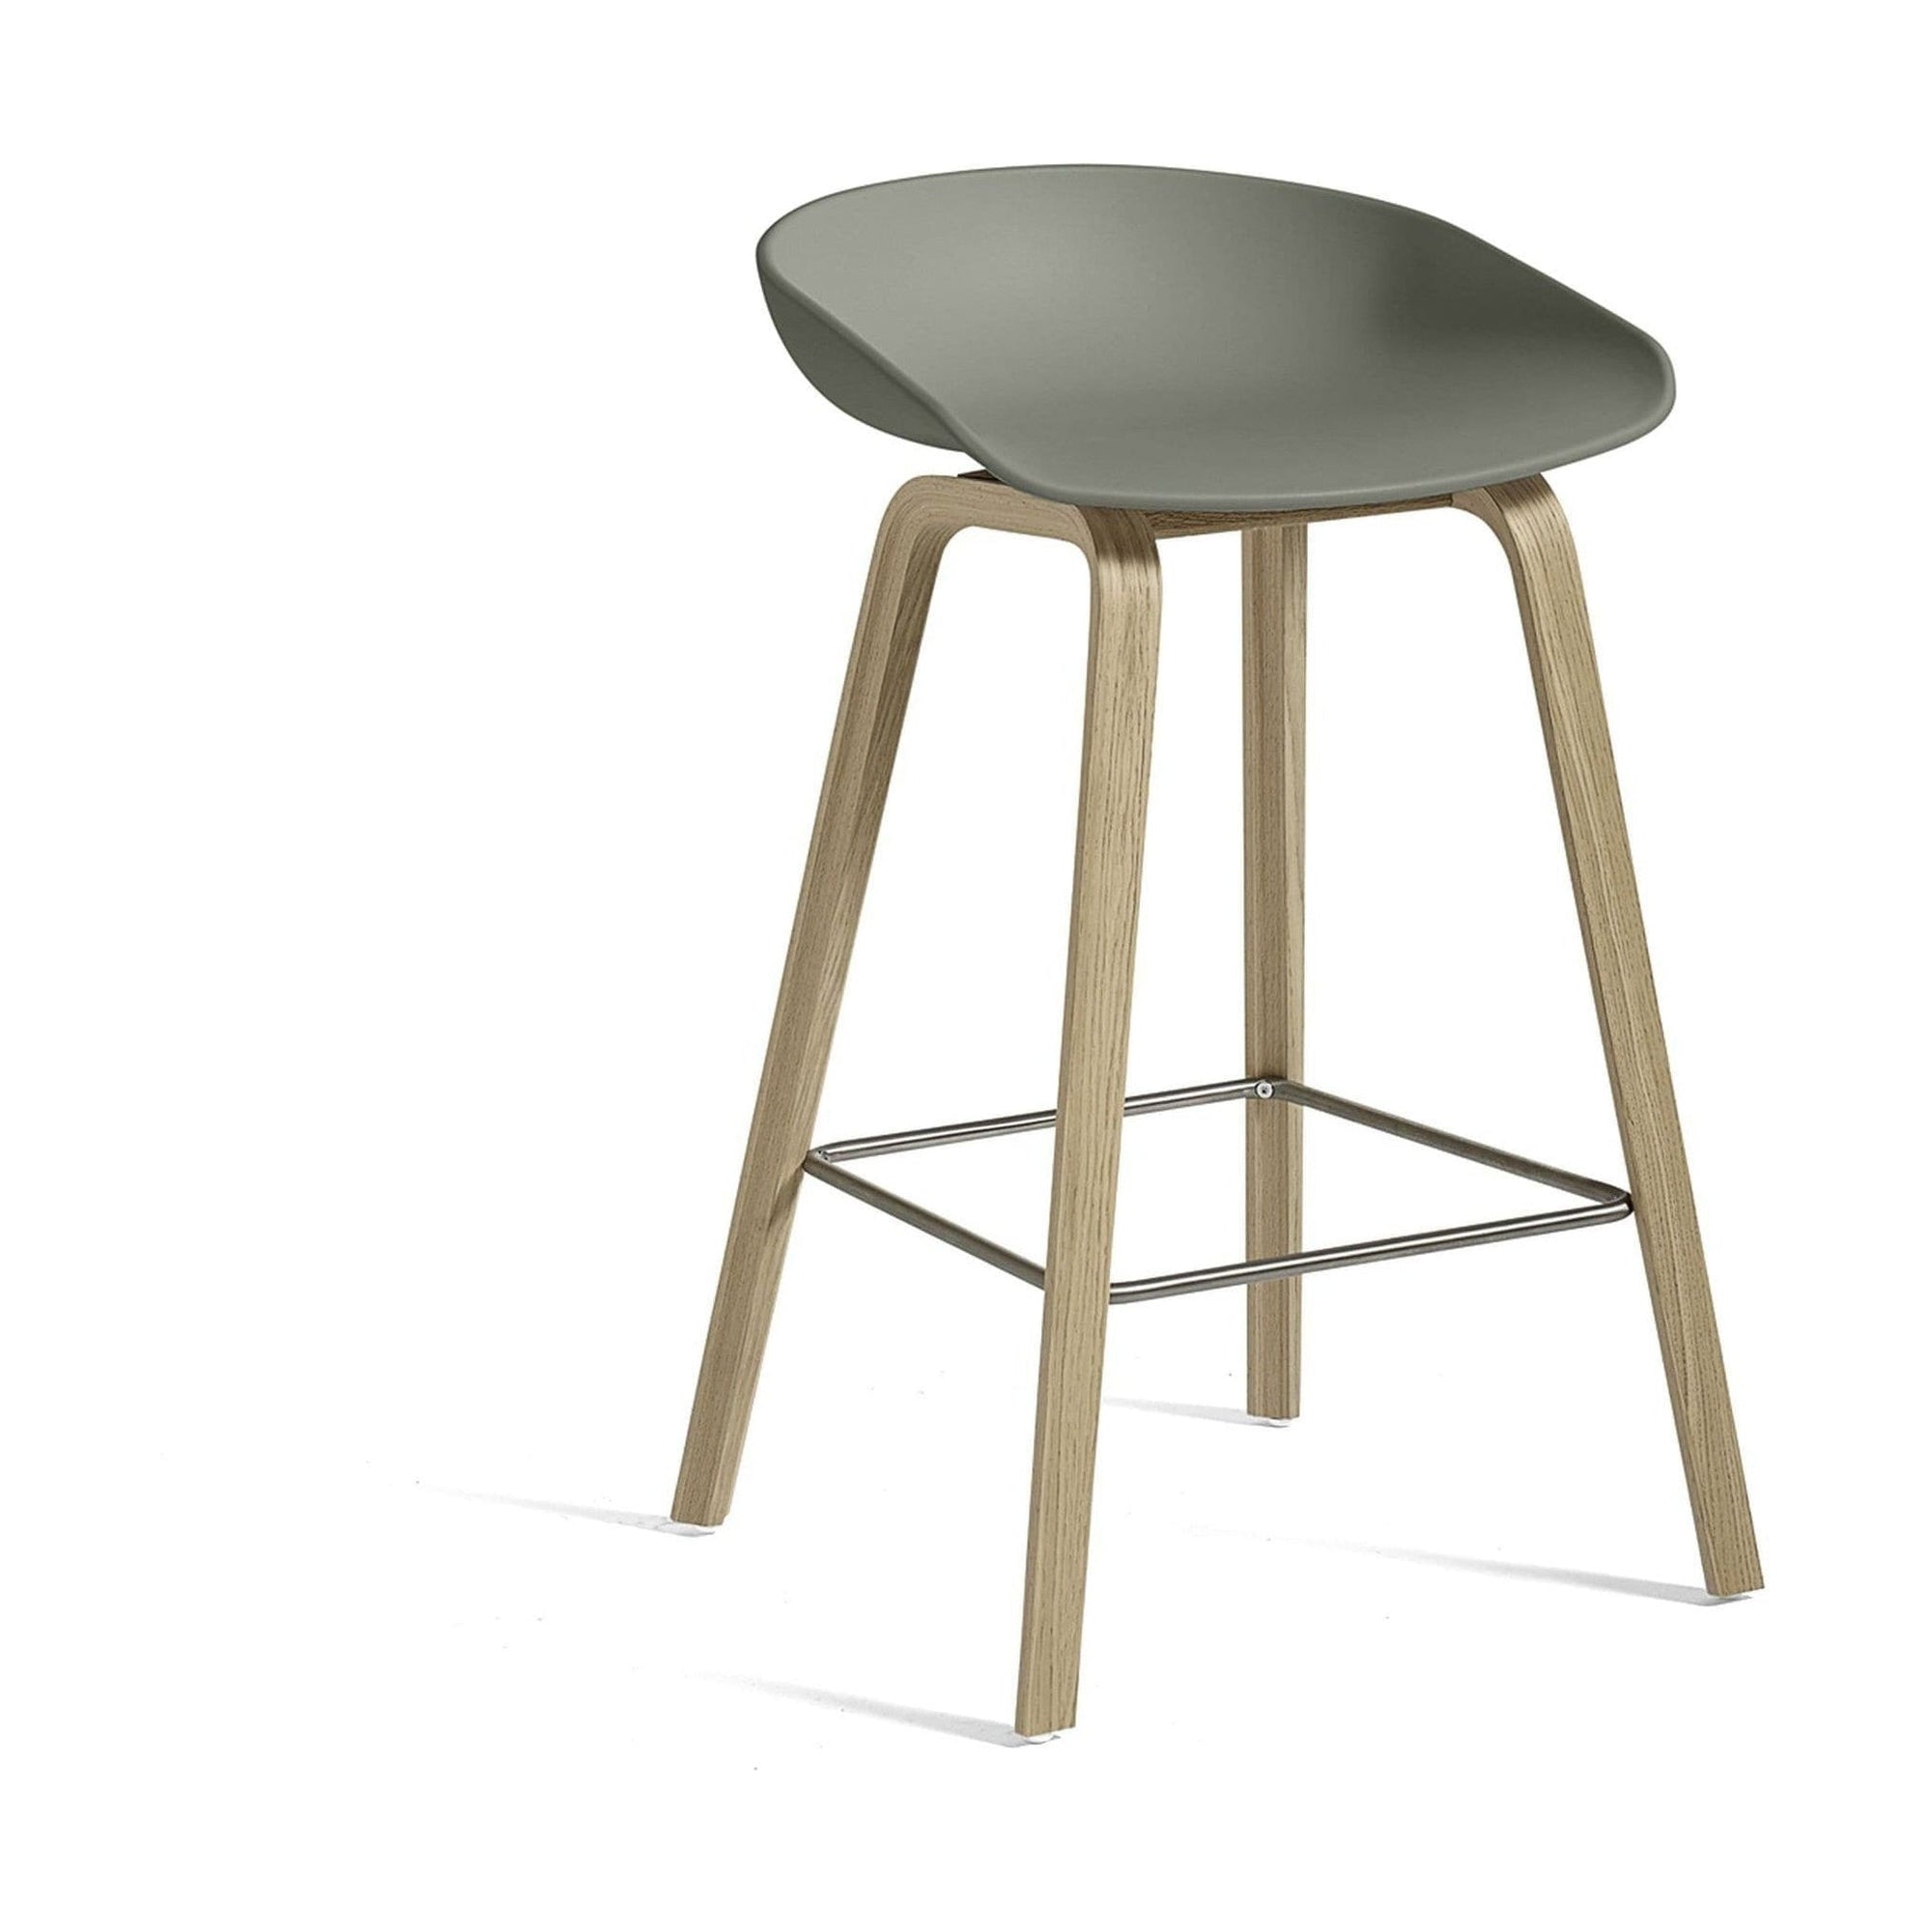 HAY About a Stool AAS 32 Barkruk H65 gelakt waterbasis Dusty Green –